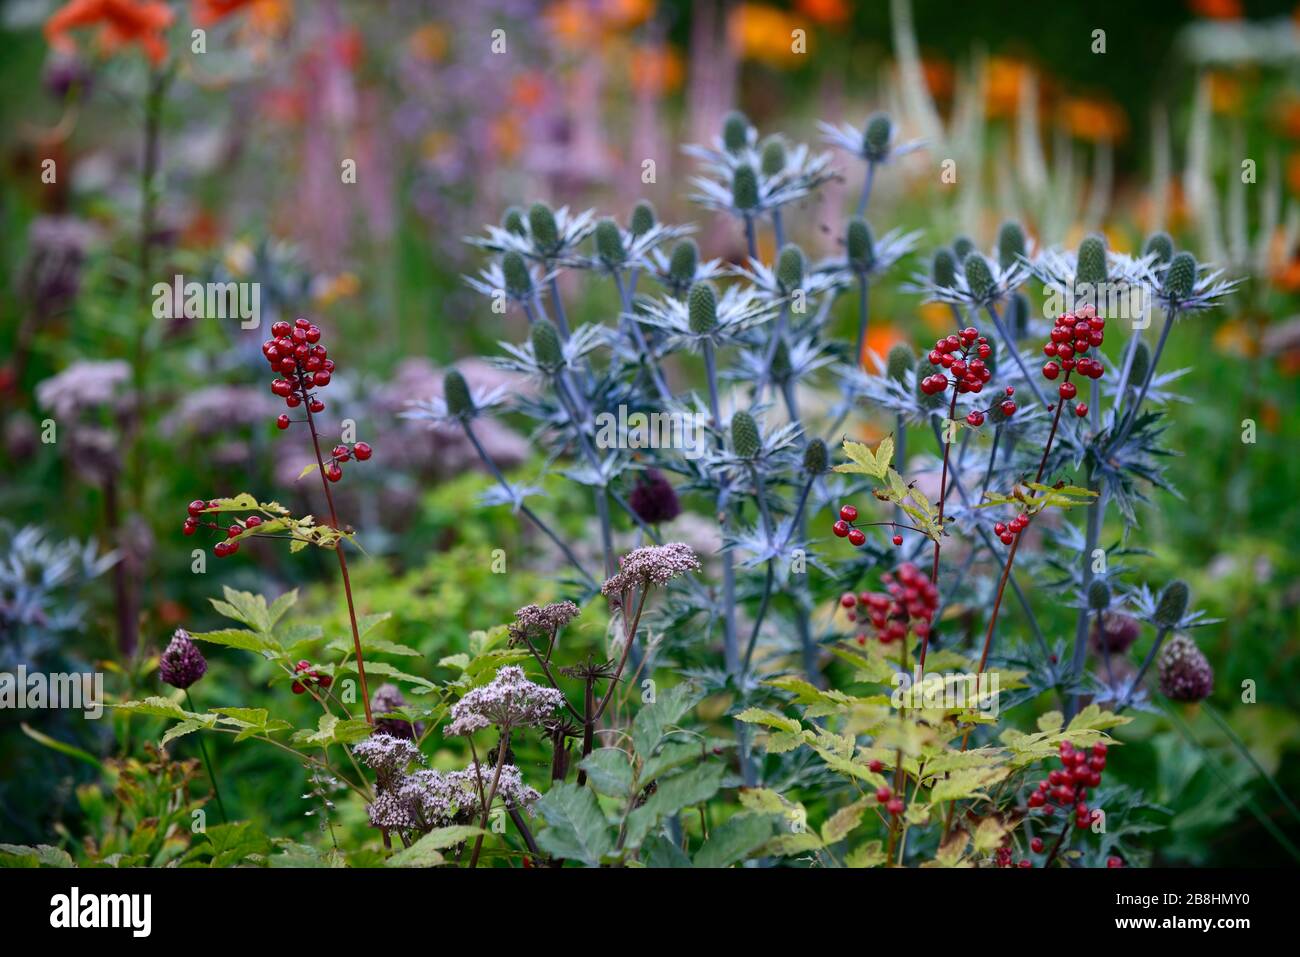 red berries,Actaea rubra,red baneberry,chinaberry,Eryngium × zabelii big blue,blue thistle,blue sea holly,flower,flowers,flowering,bract,bracts,garden Stock Photo